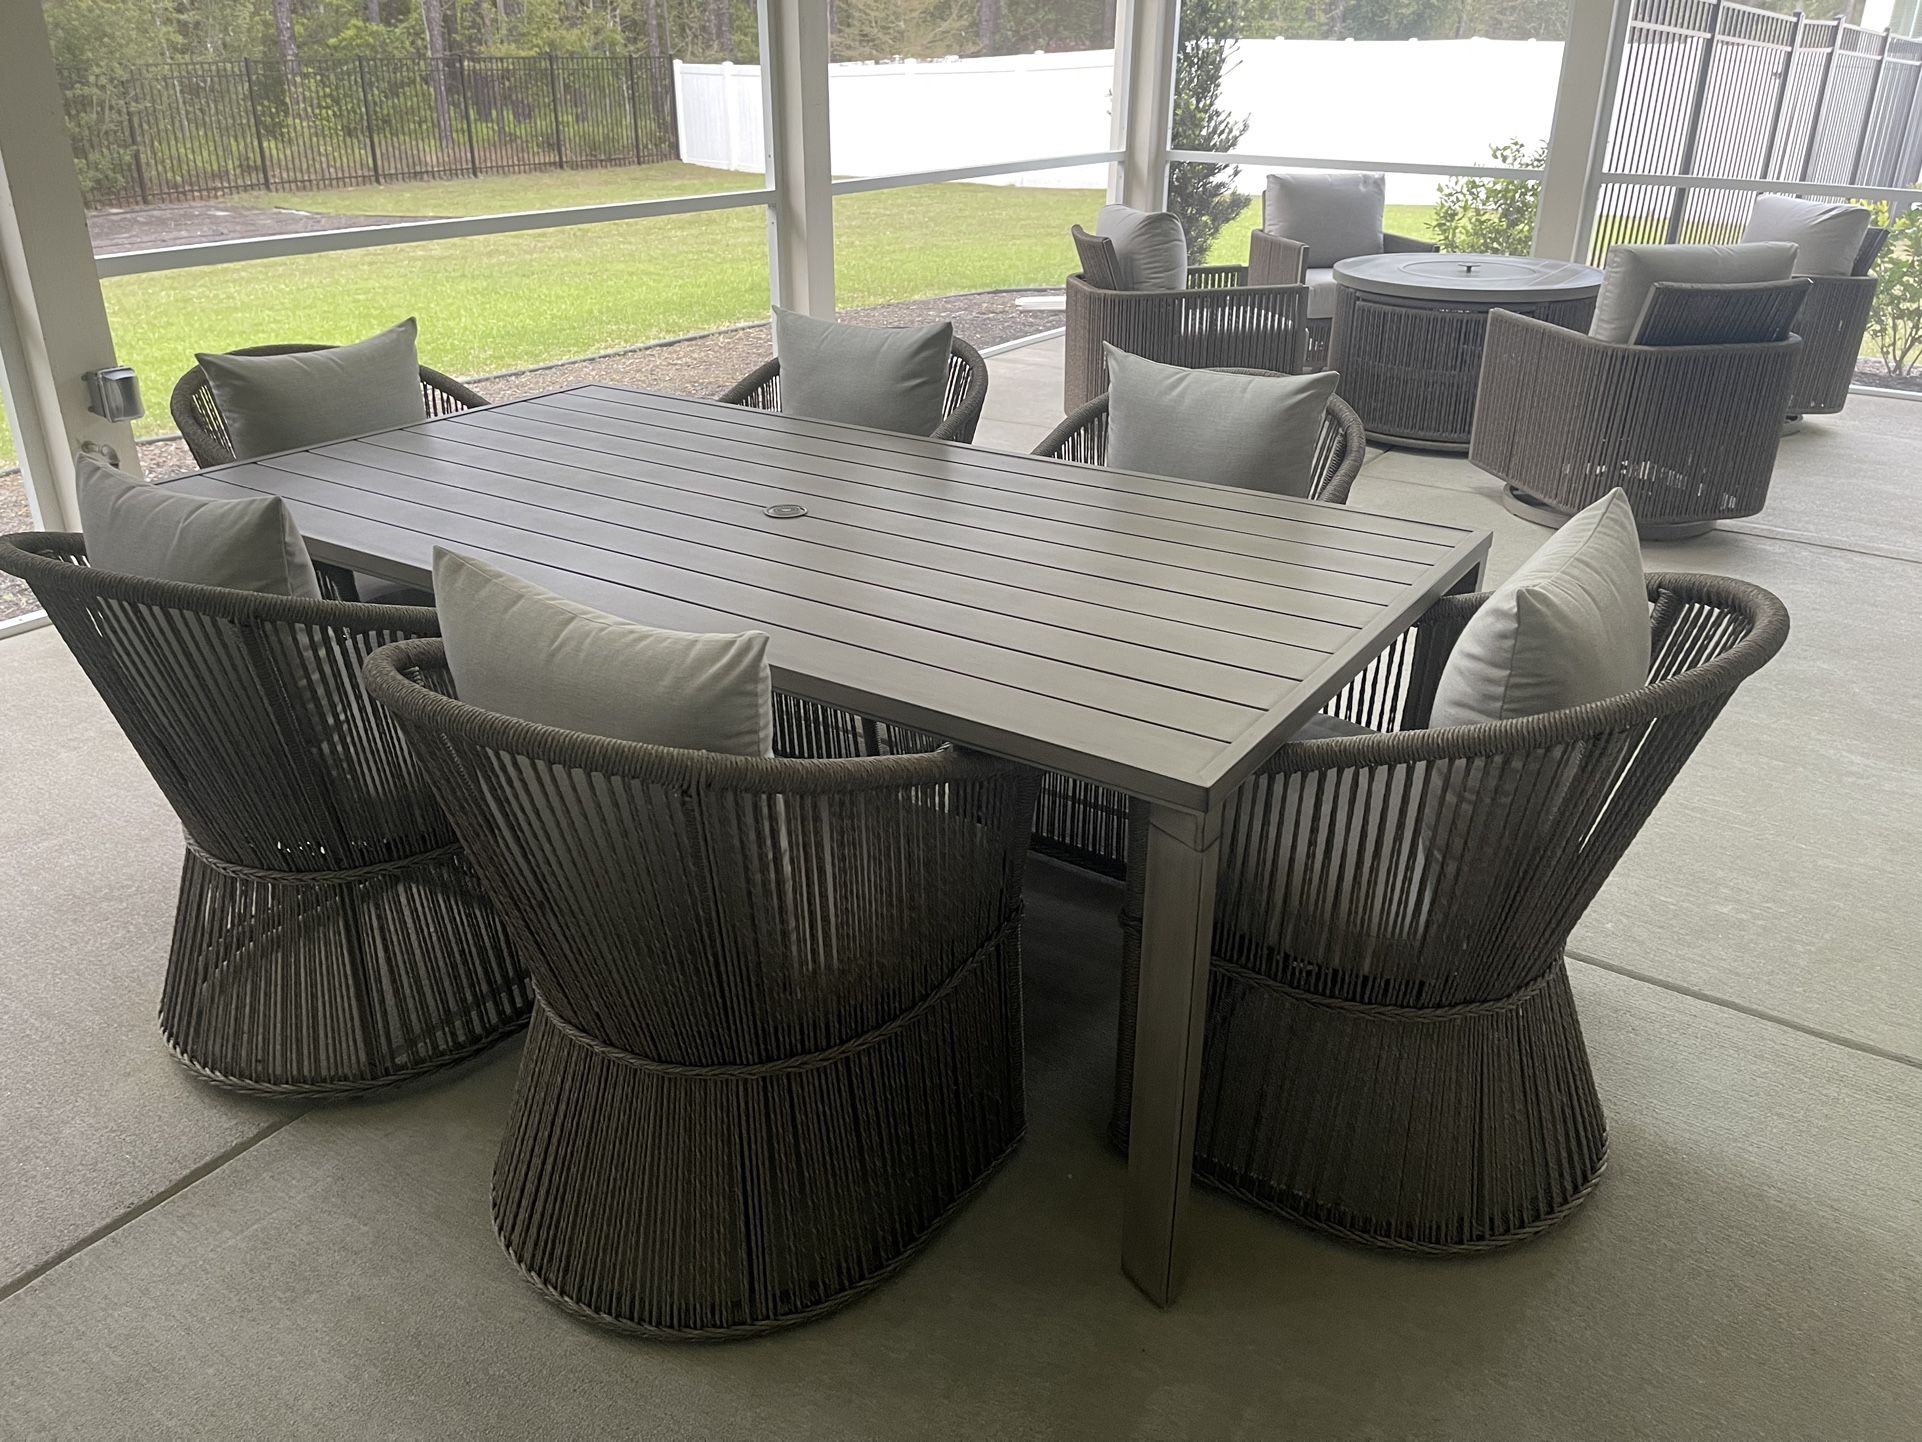  New Patio Furniture 6 Sets Table and 5 Seat Fire Pit Group (separate or as a set)